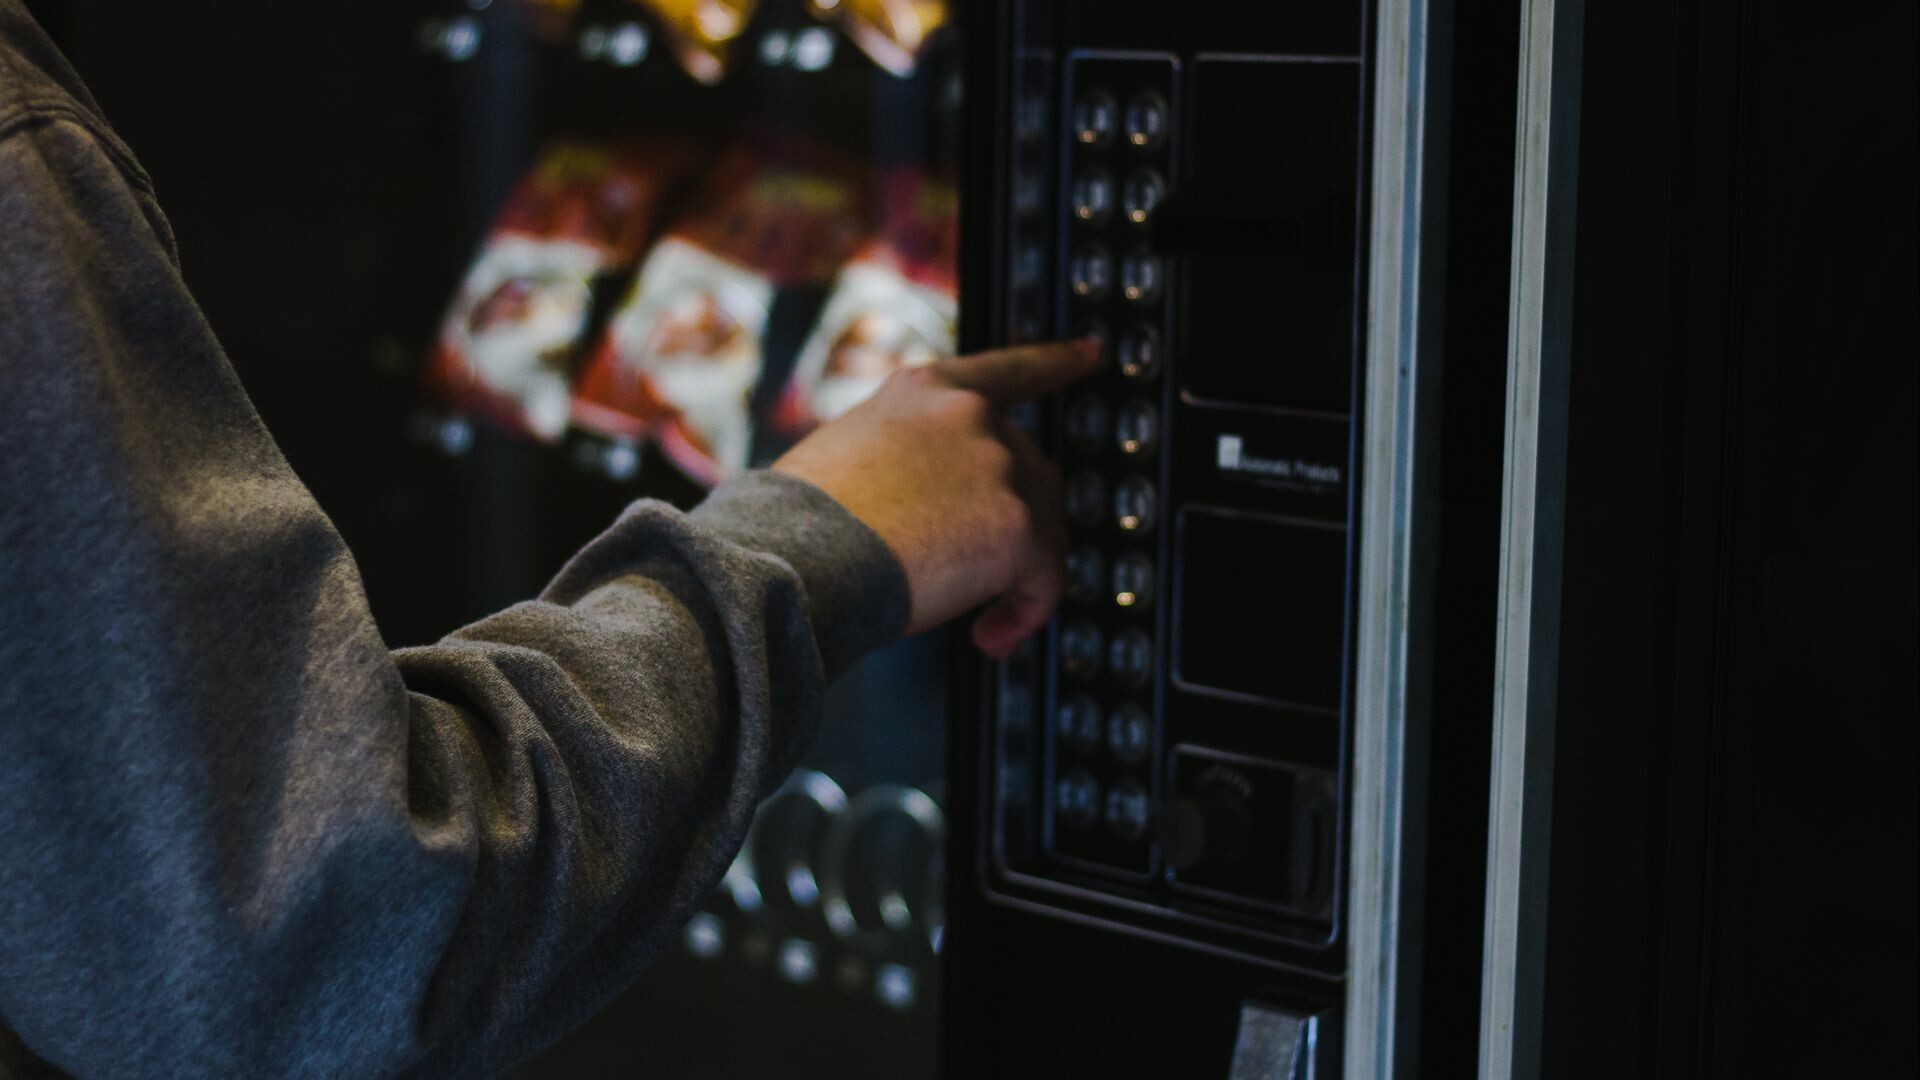 Person pushing a button on a vending machine.